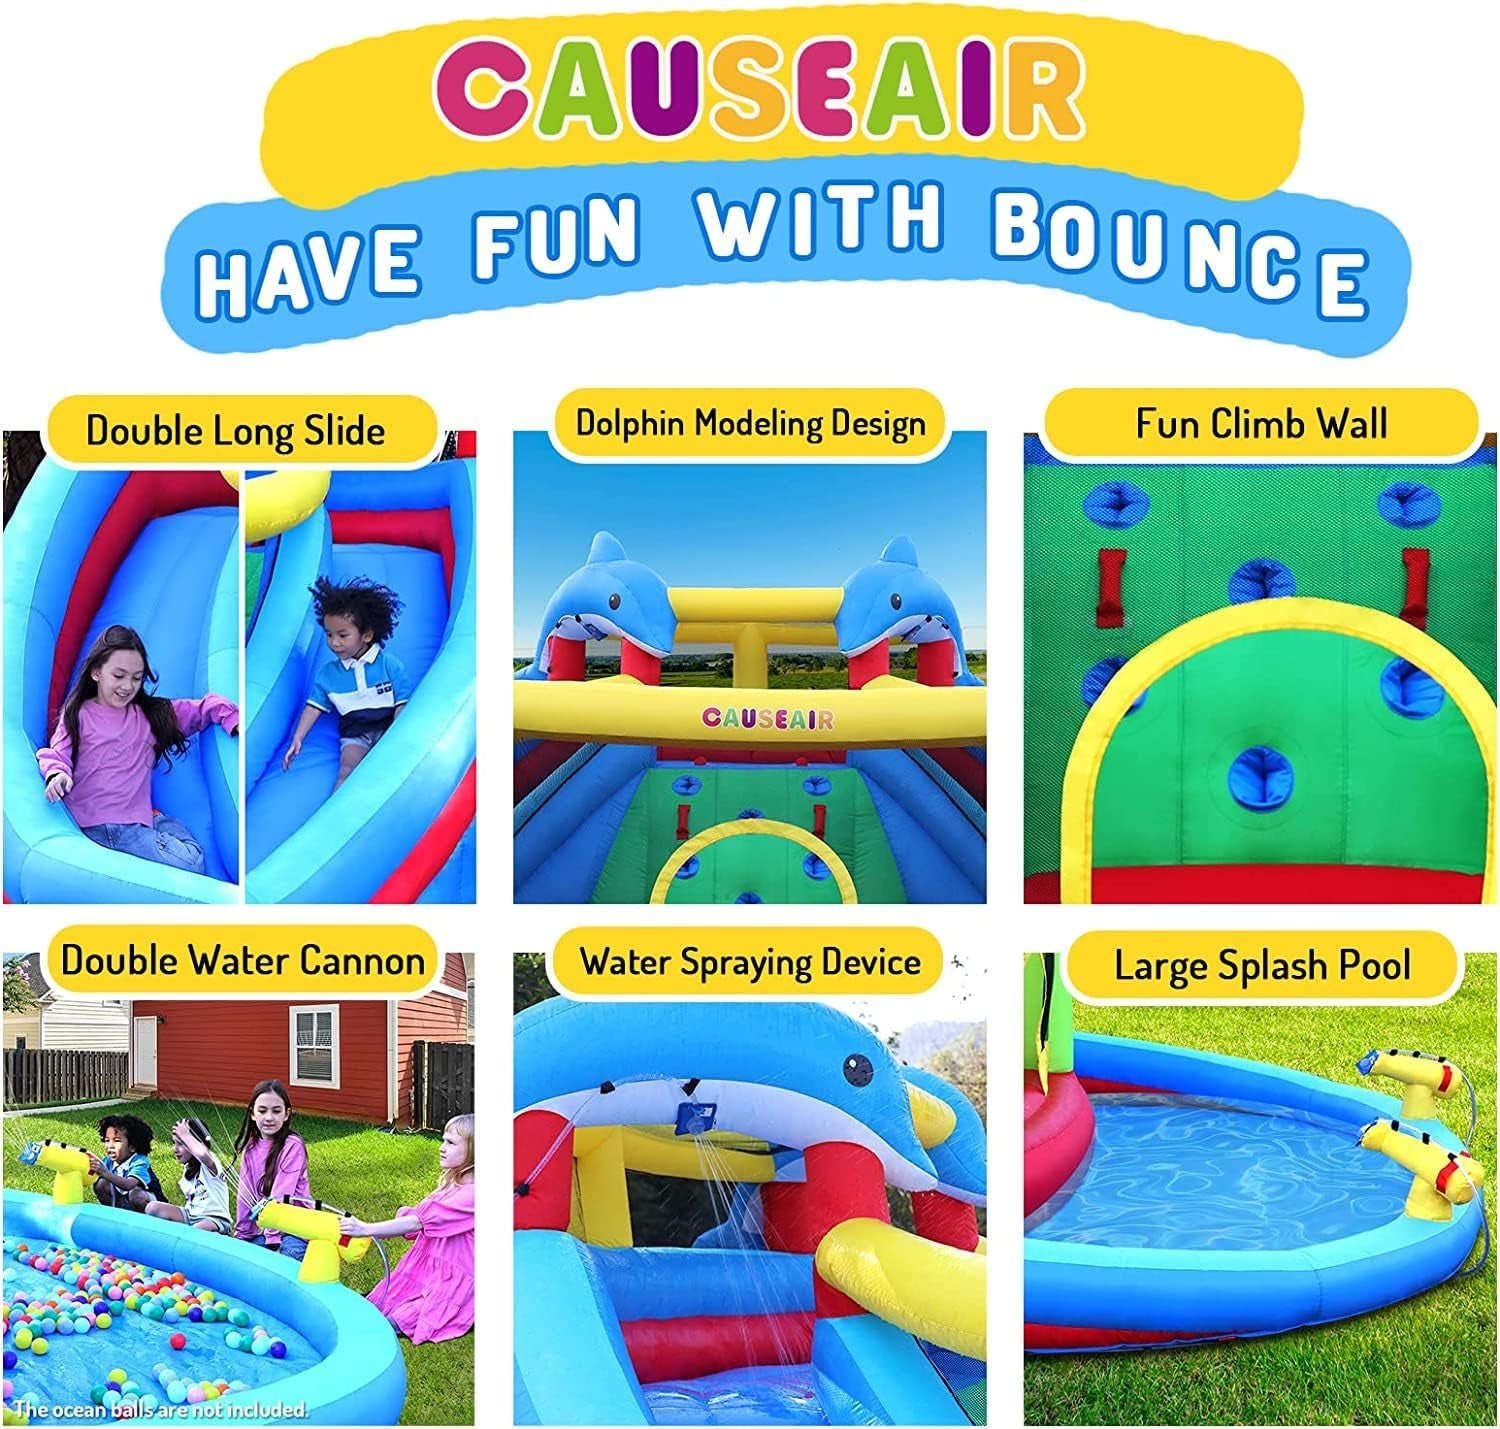 Inflatable Water Slide with Bounce House,Dolphin Styling,Splashing Pool,Double Water Cannon,Climbing Wall,Heavy Duty GFCI Blower,Inflatable Water Park for Kids Backyard Summer